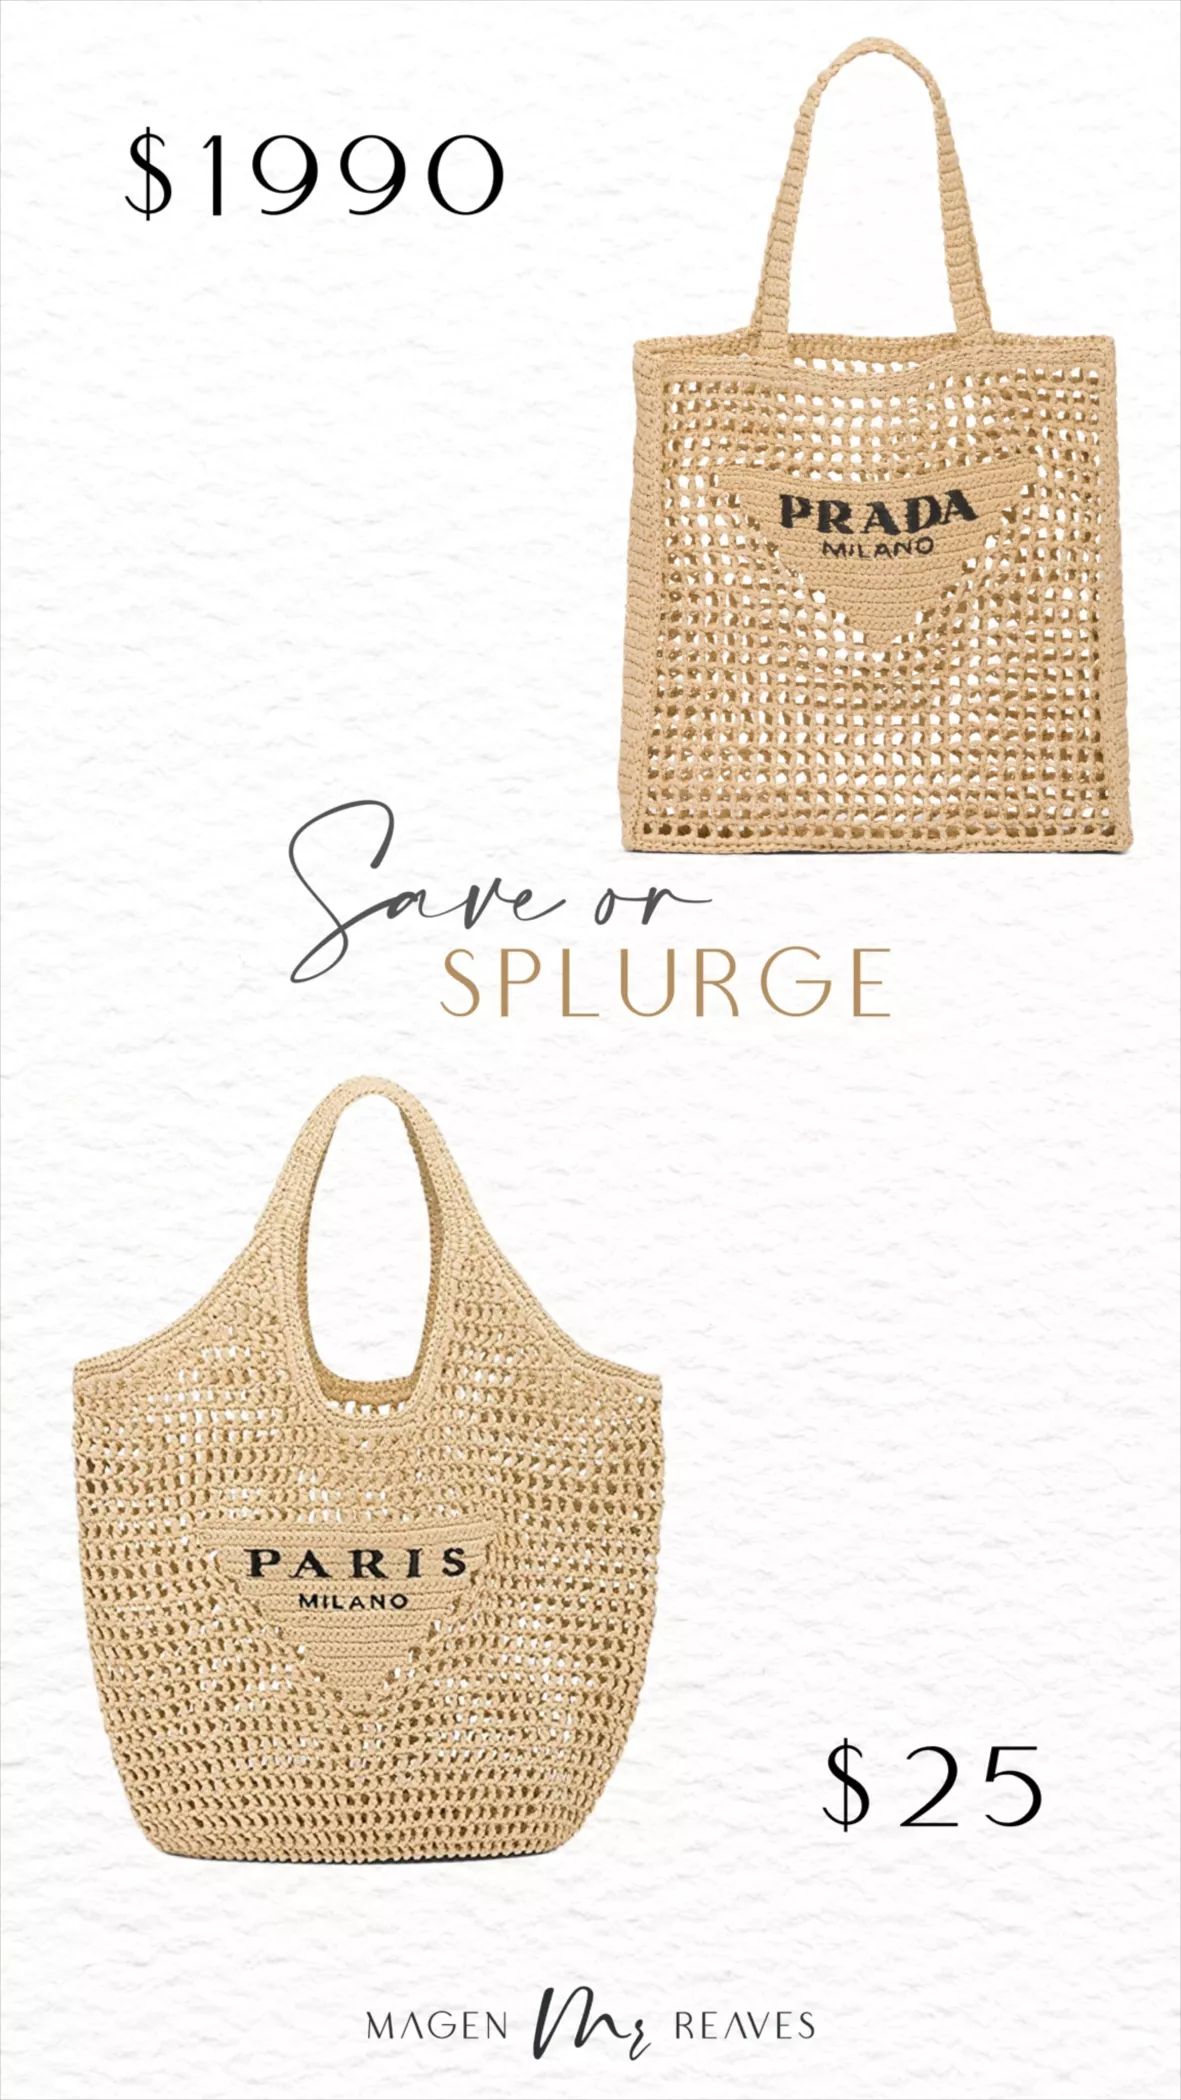 This Prada Crocheted Tote Bag Is This summer's It-Bag According To